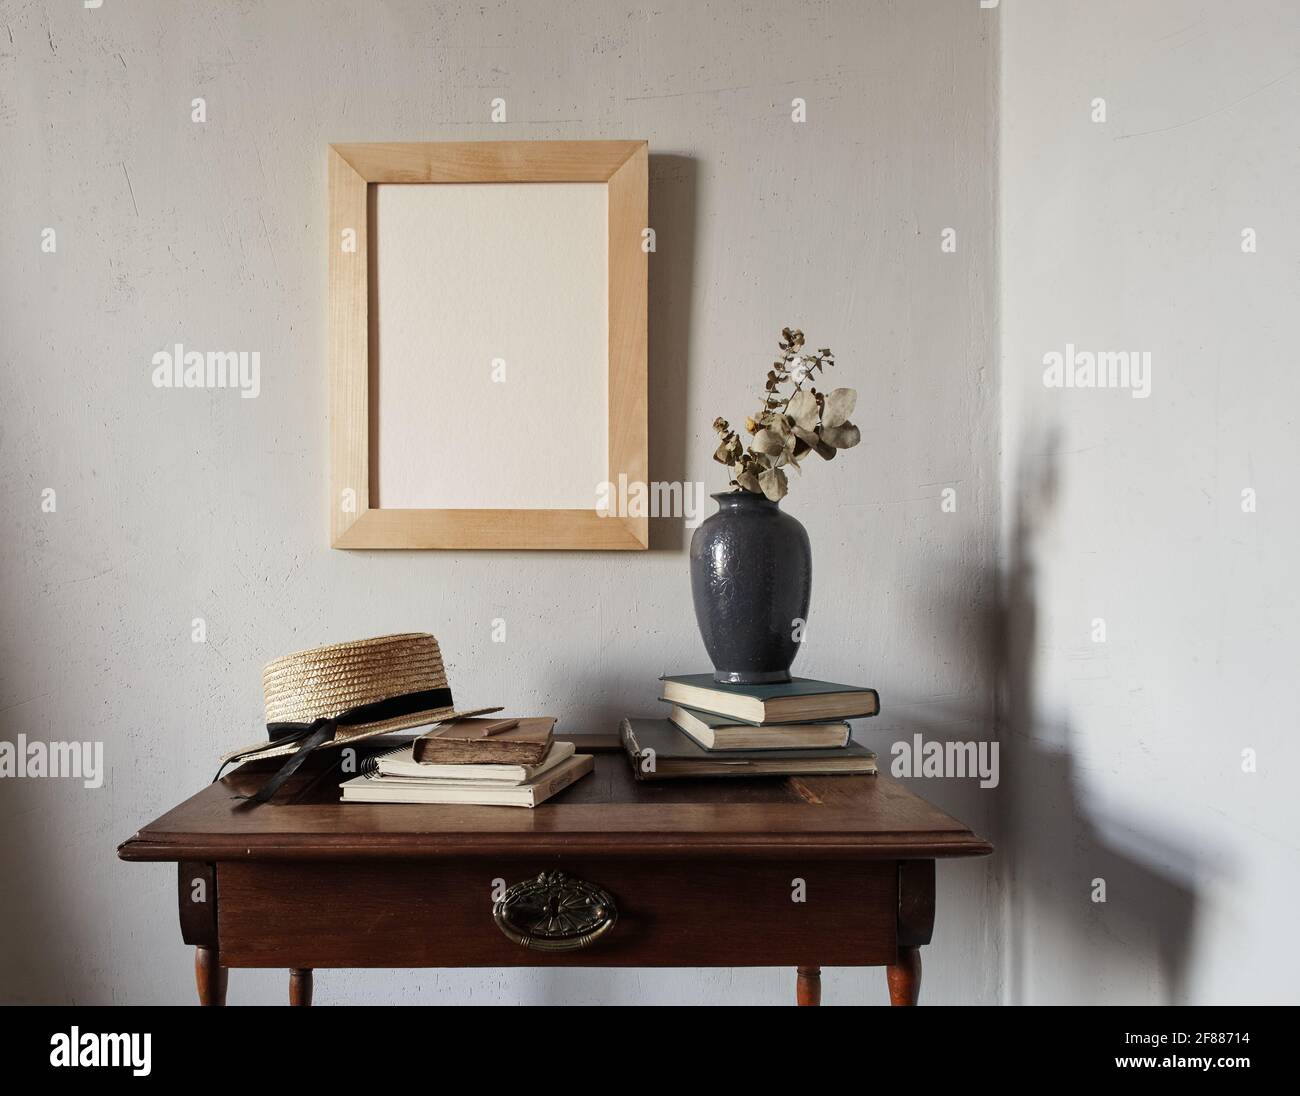 Wooden frame mockup. composition with notebook, books, vase with dried flowers on an old wooden table Stock Photo